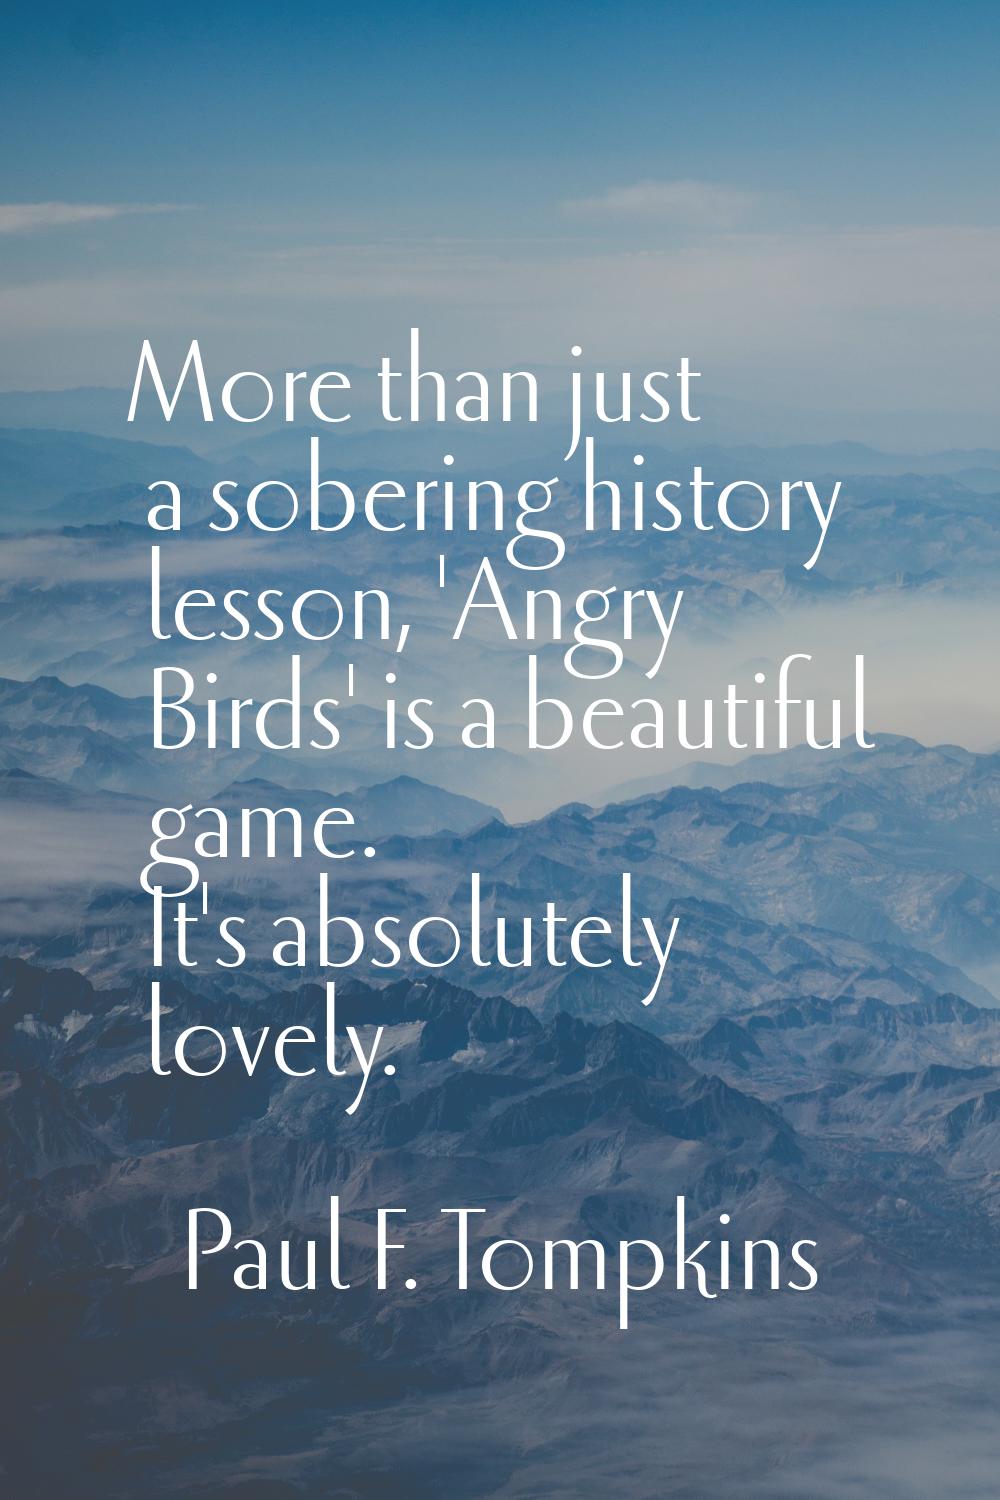 More than just a sobering history lesson, 'Angry Birds' is a beautiful game. It's absolutely lovely